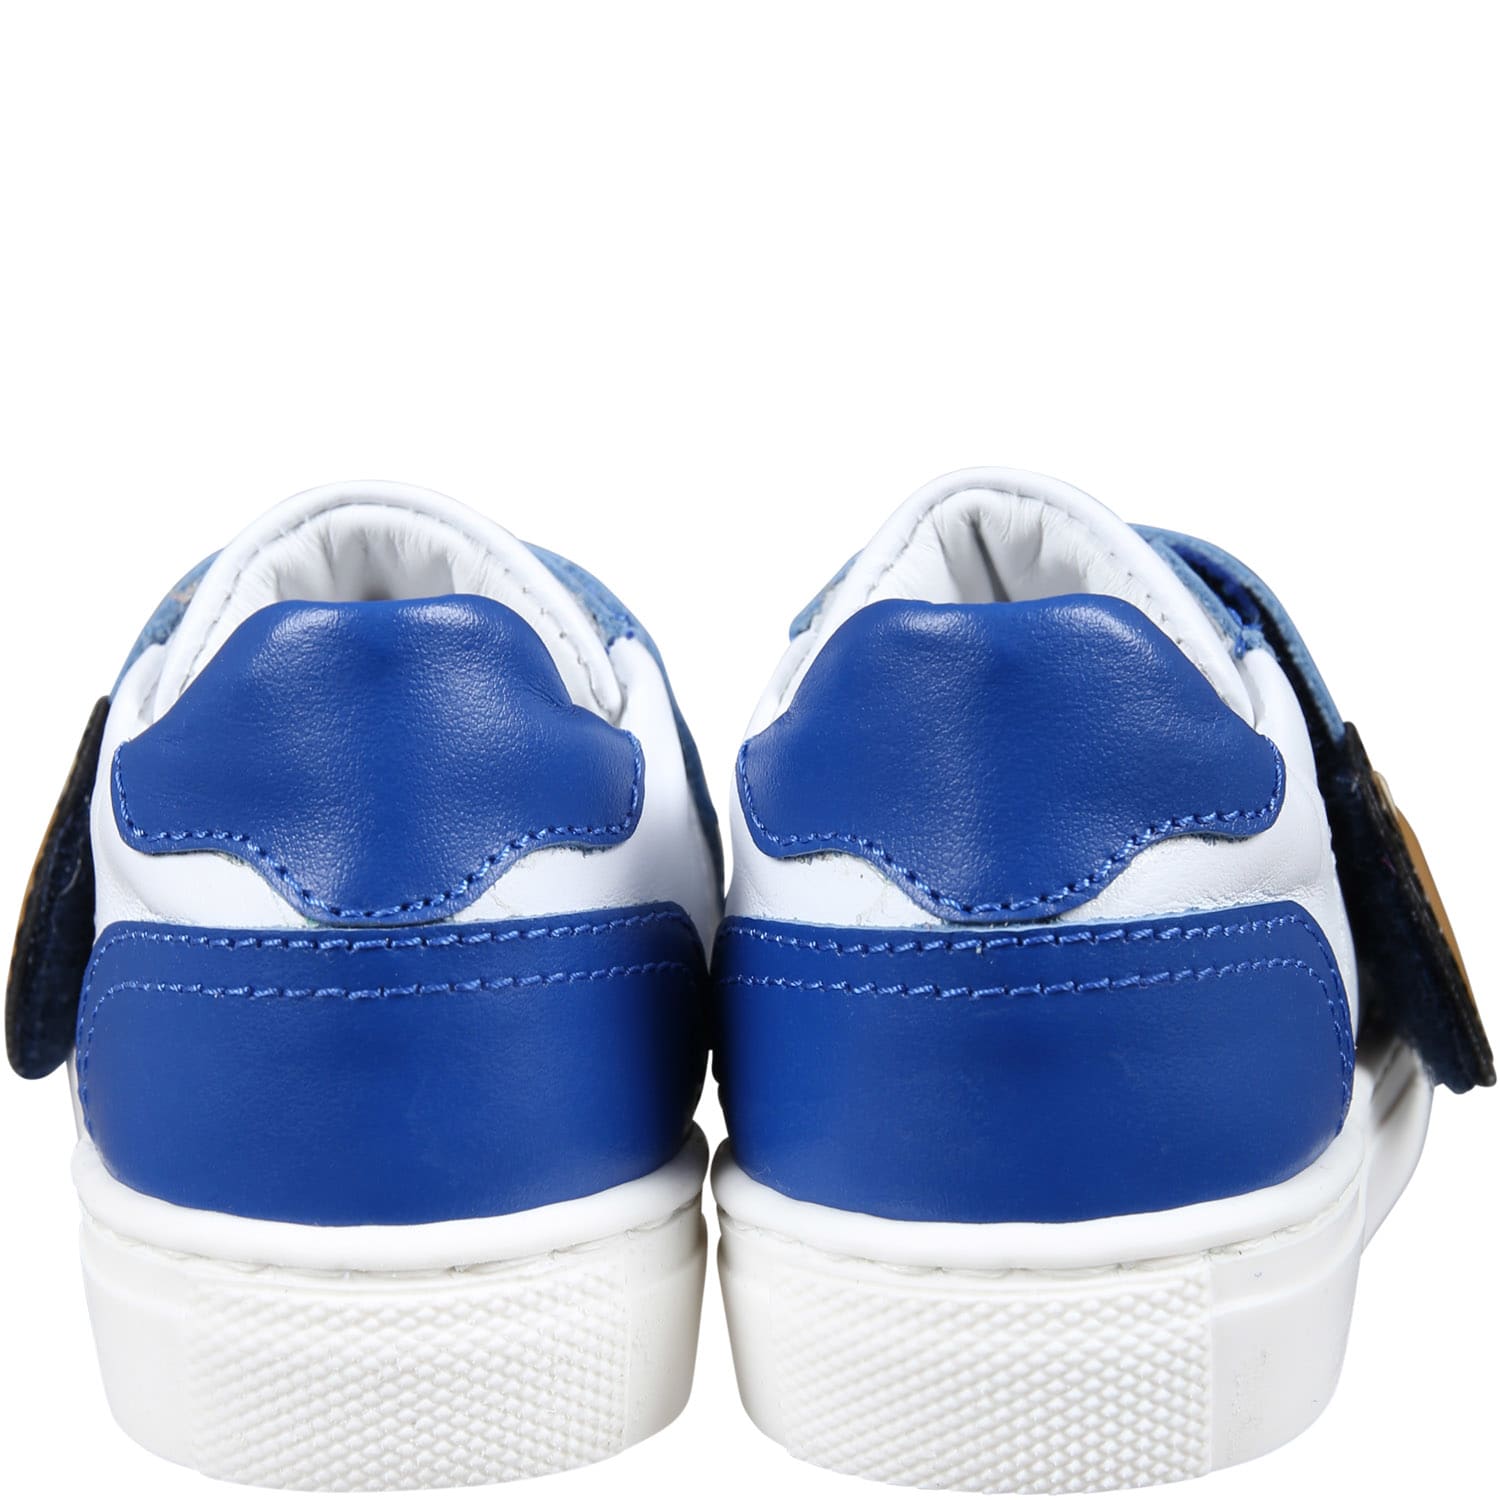 Shop Moschino Light Blue Sneakers For Boy With Tedy Bear